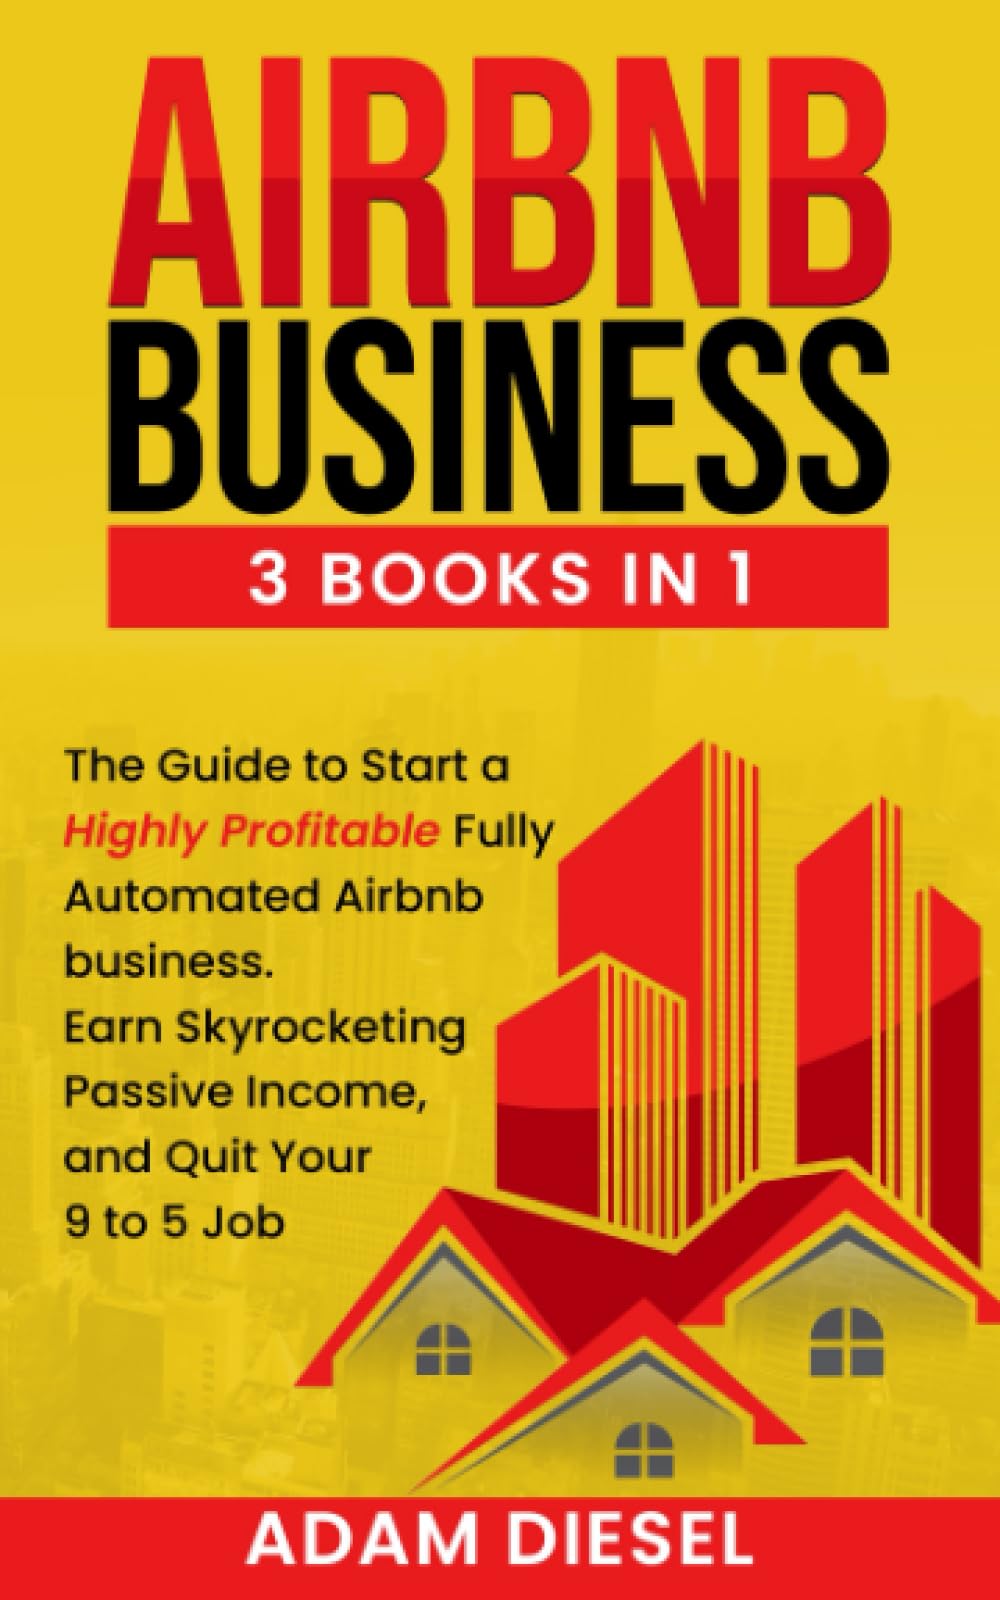 Airbnb Business: 3 books in1 The Guide to Start a Highly Profitable Fully Automated Airbnb business. Earn Skyrocketing Passive Income, and Quit Your 9 to 5 Job (The Wealth Creation)